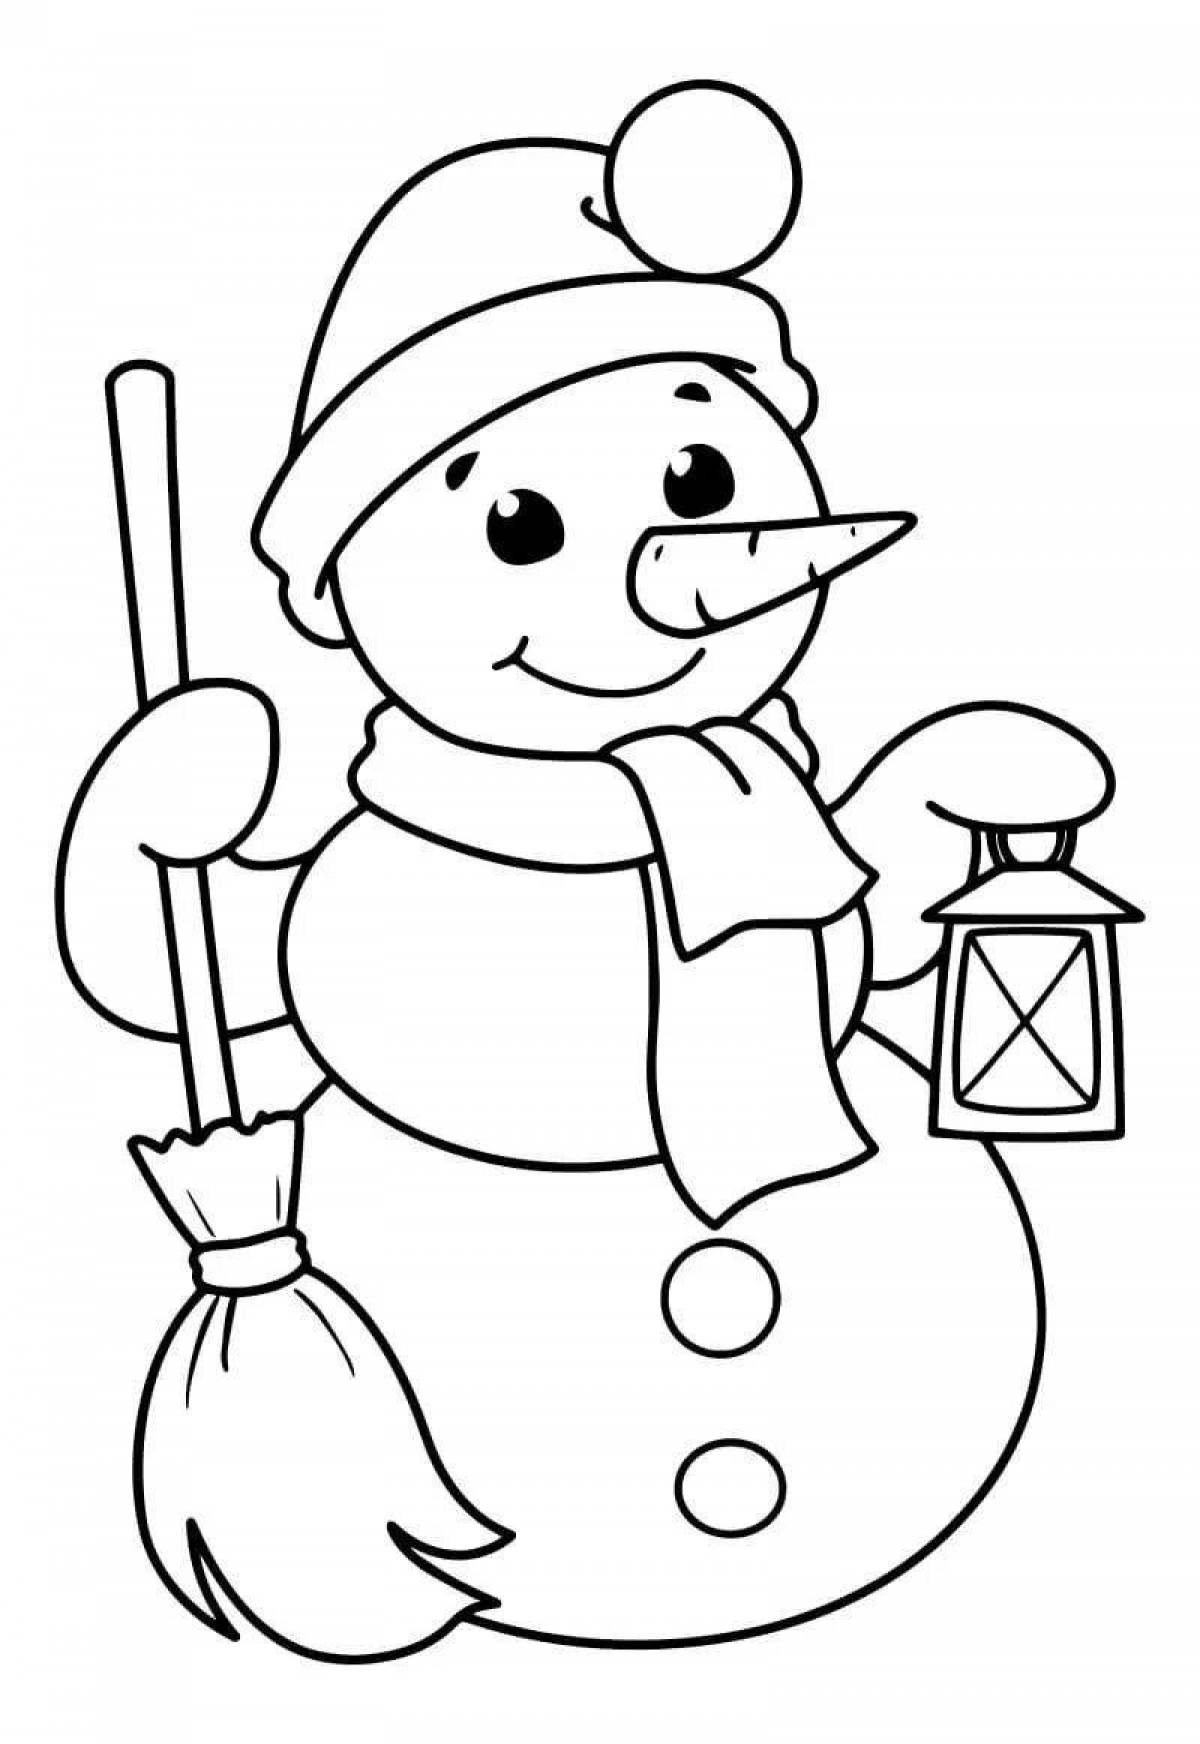 Sweet snowman coloring page